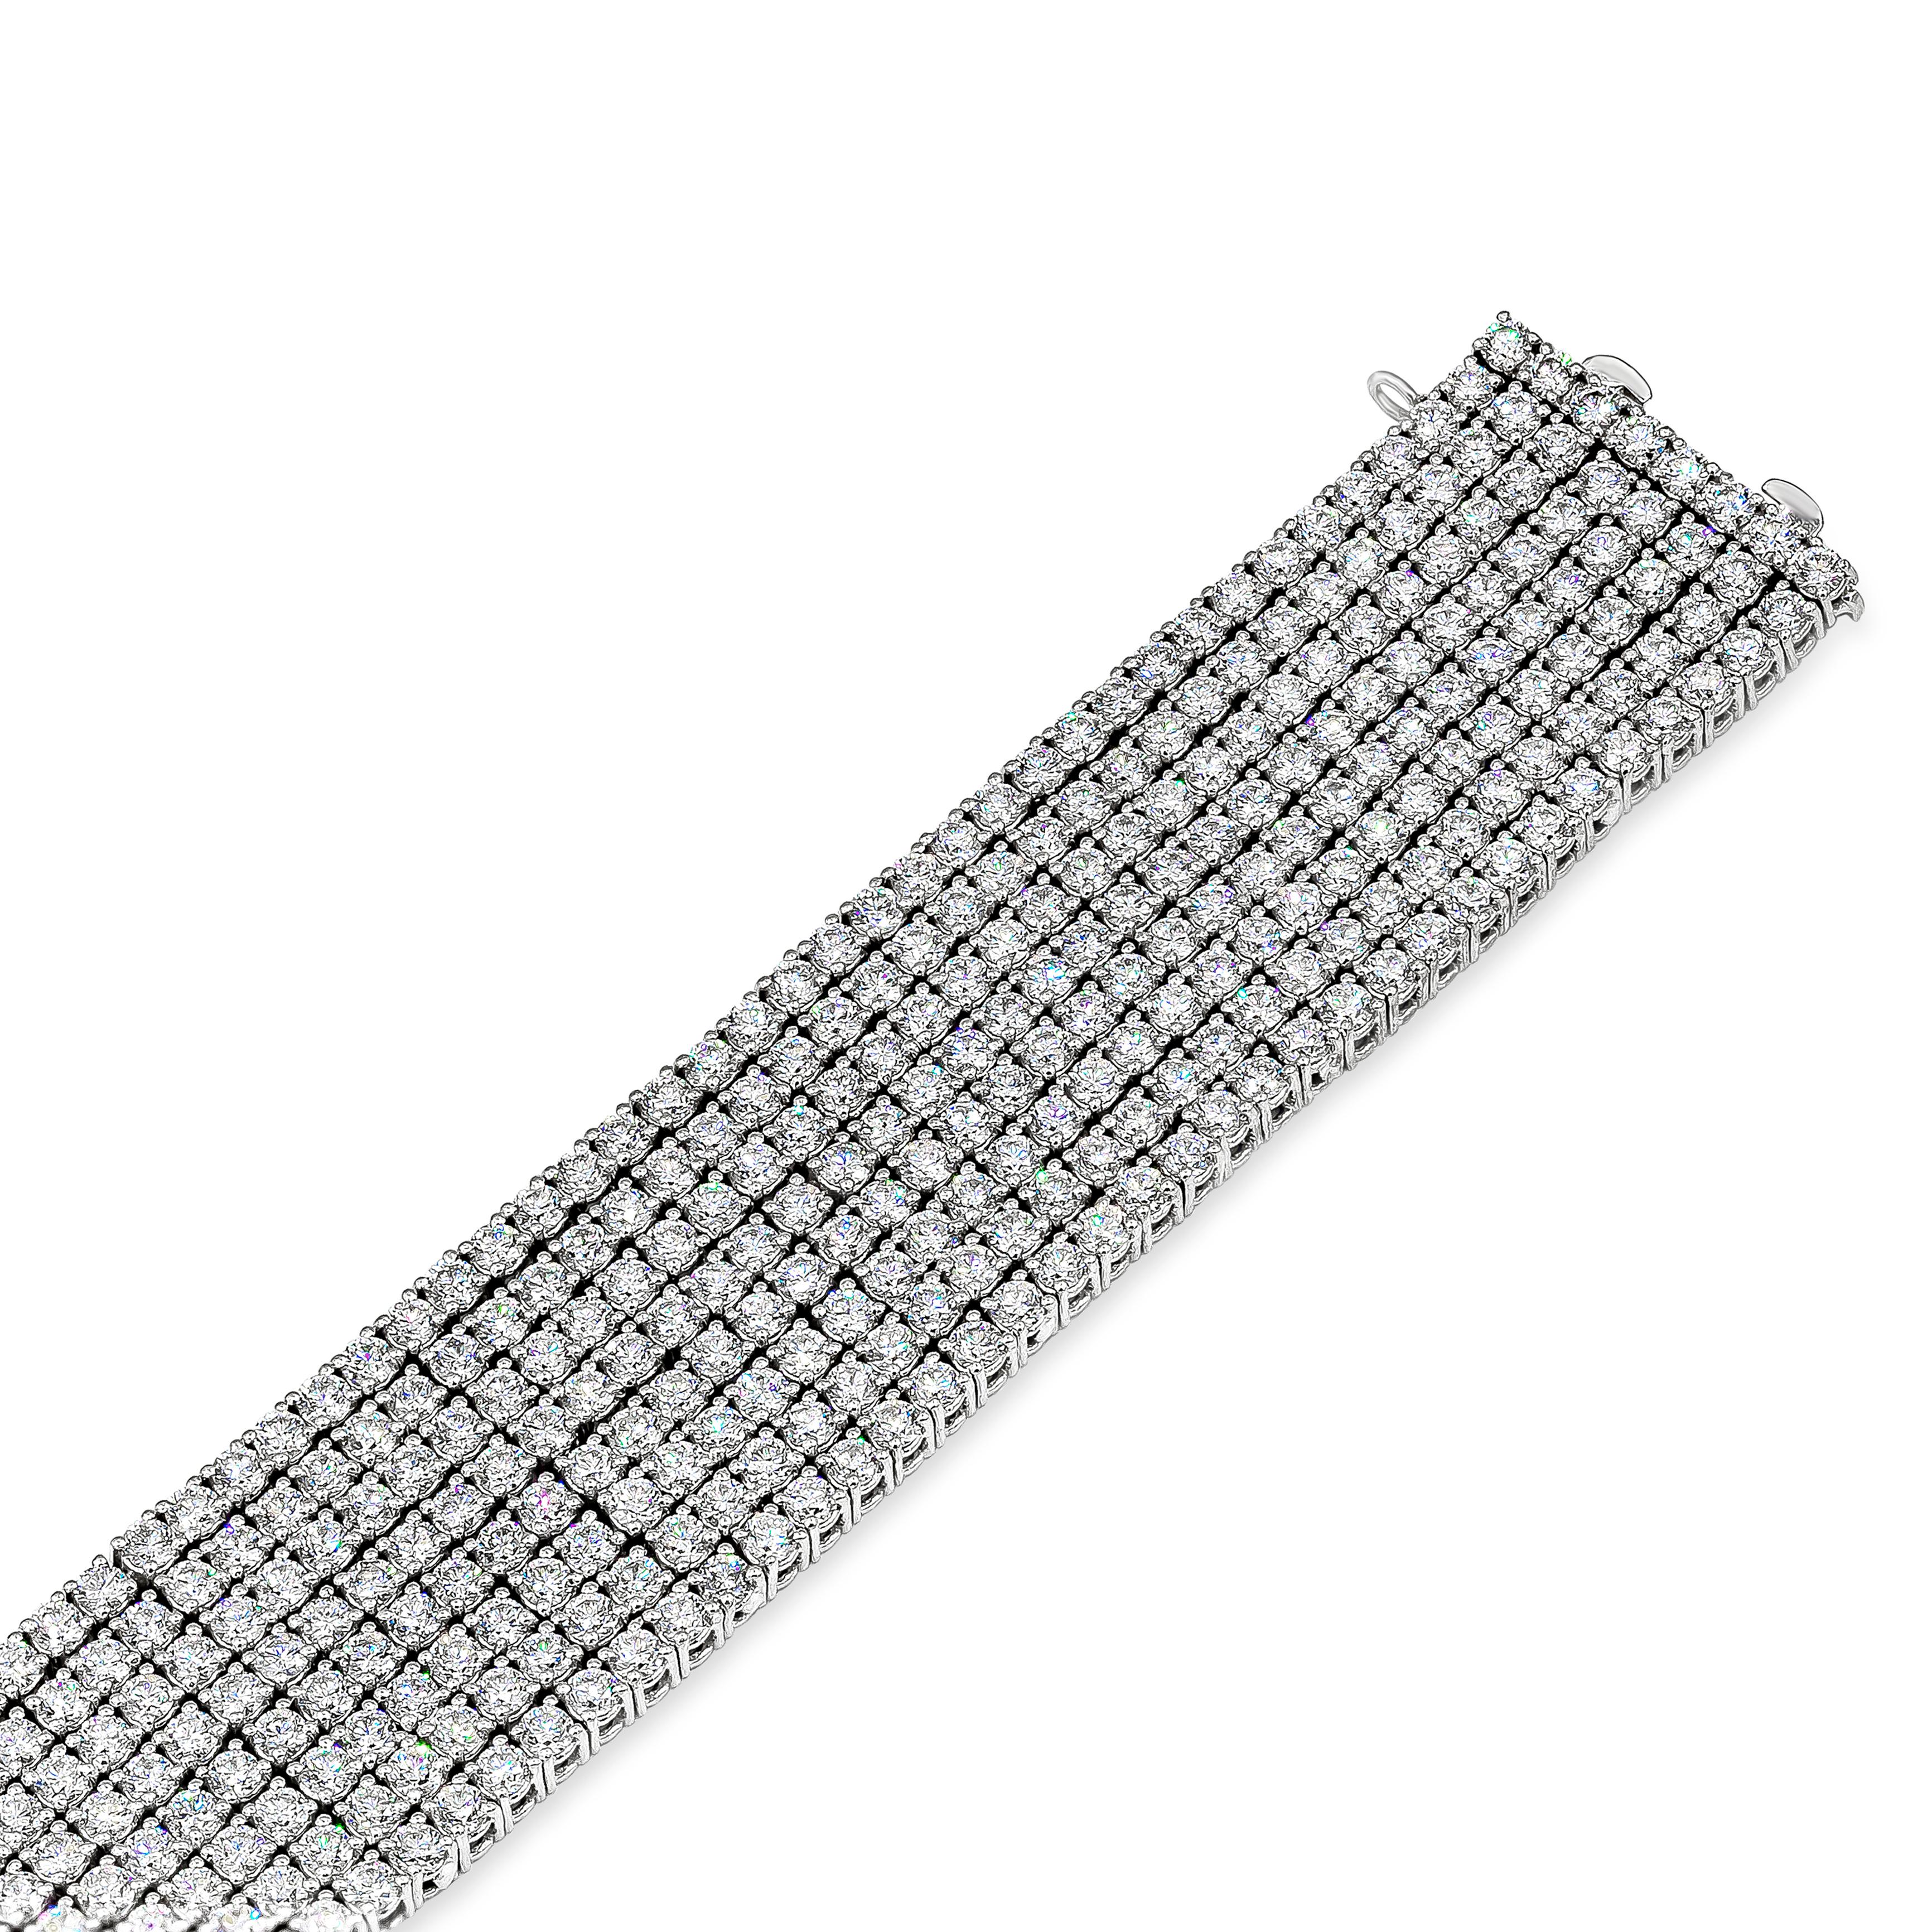 A classic and important tennis bracelet featuring eight rows of round brilliant diamonds weighing 30.20 carats total, G Color and VS-SI in Clarity. Double lock mechanism for maximum security and safety. Made with 18K White Gold, 7.02 inches in